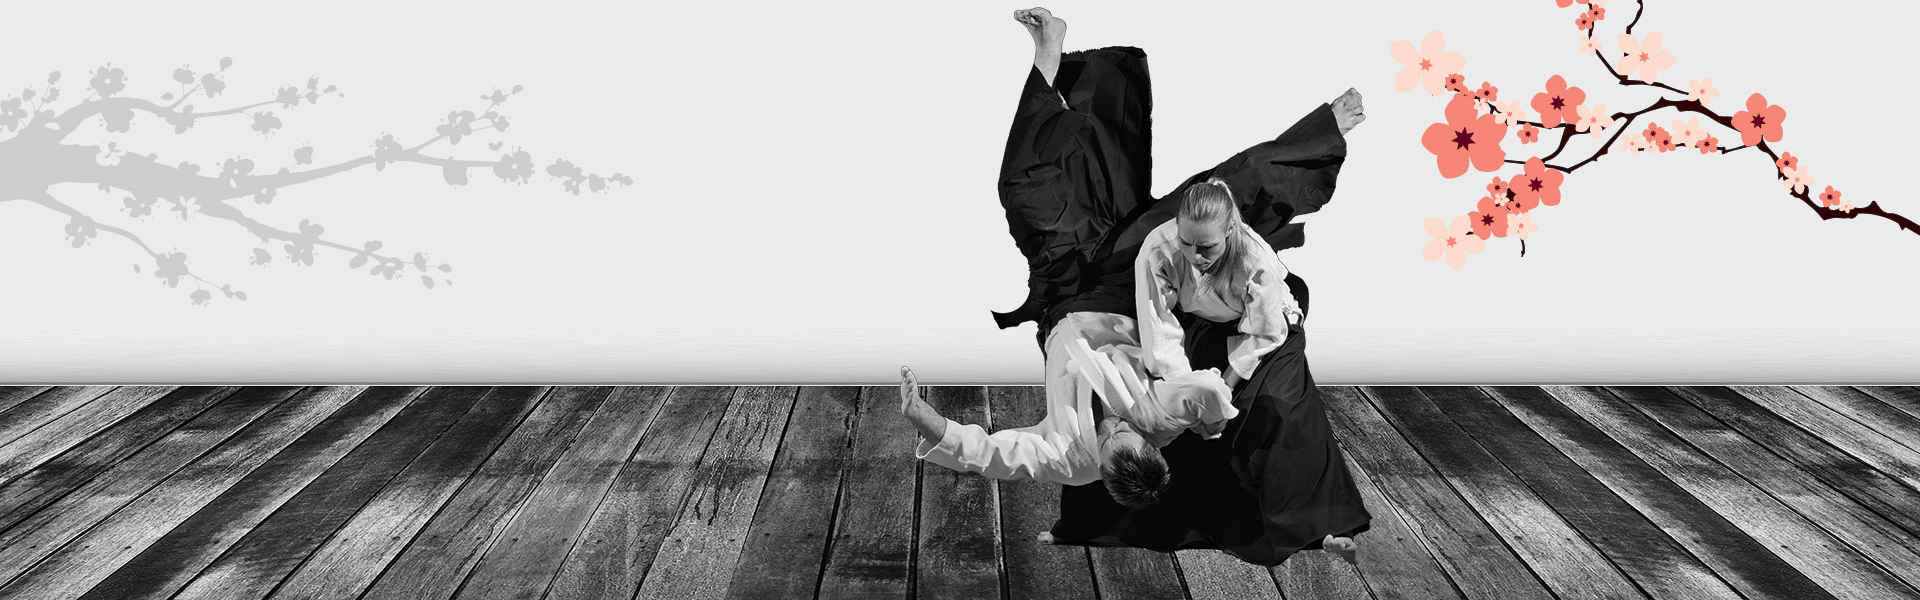 a person performing aikido on another individual